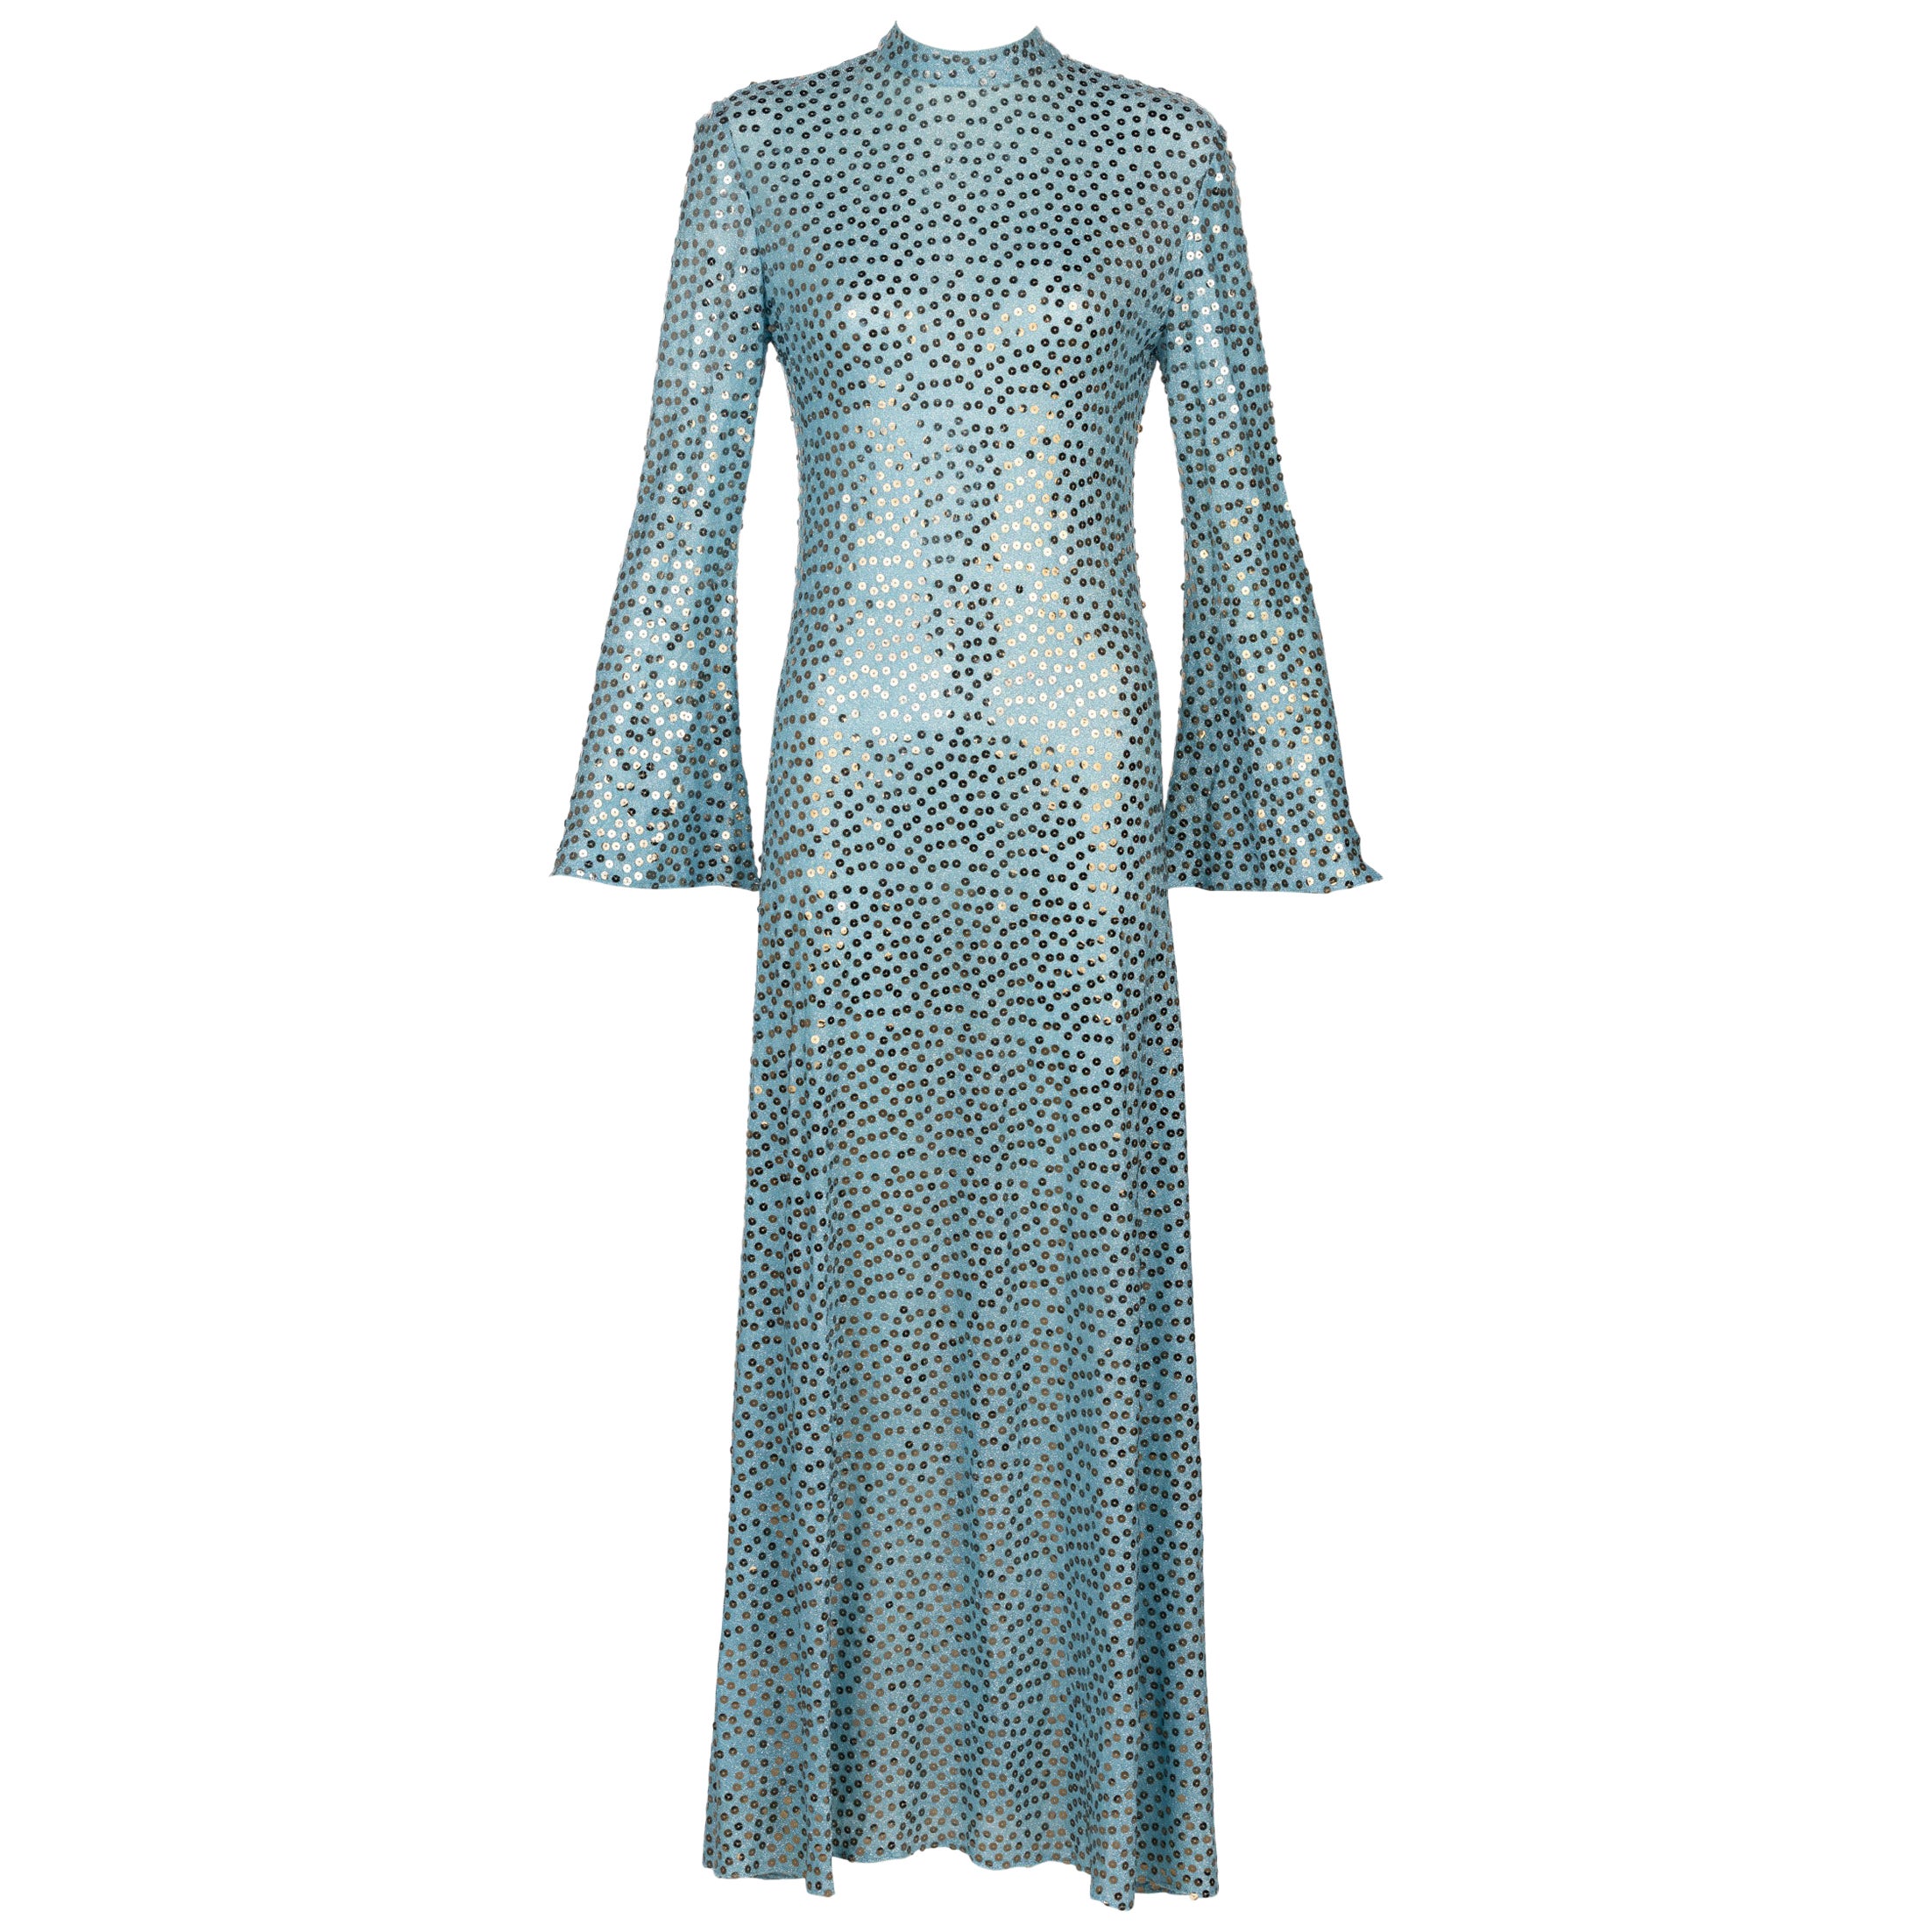 Mollie Parnis Silver Sequin Ice Blue Knit Lame Jersey Dress, 1970s For Sale